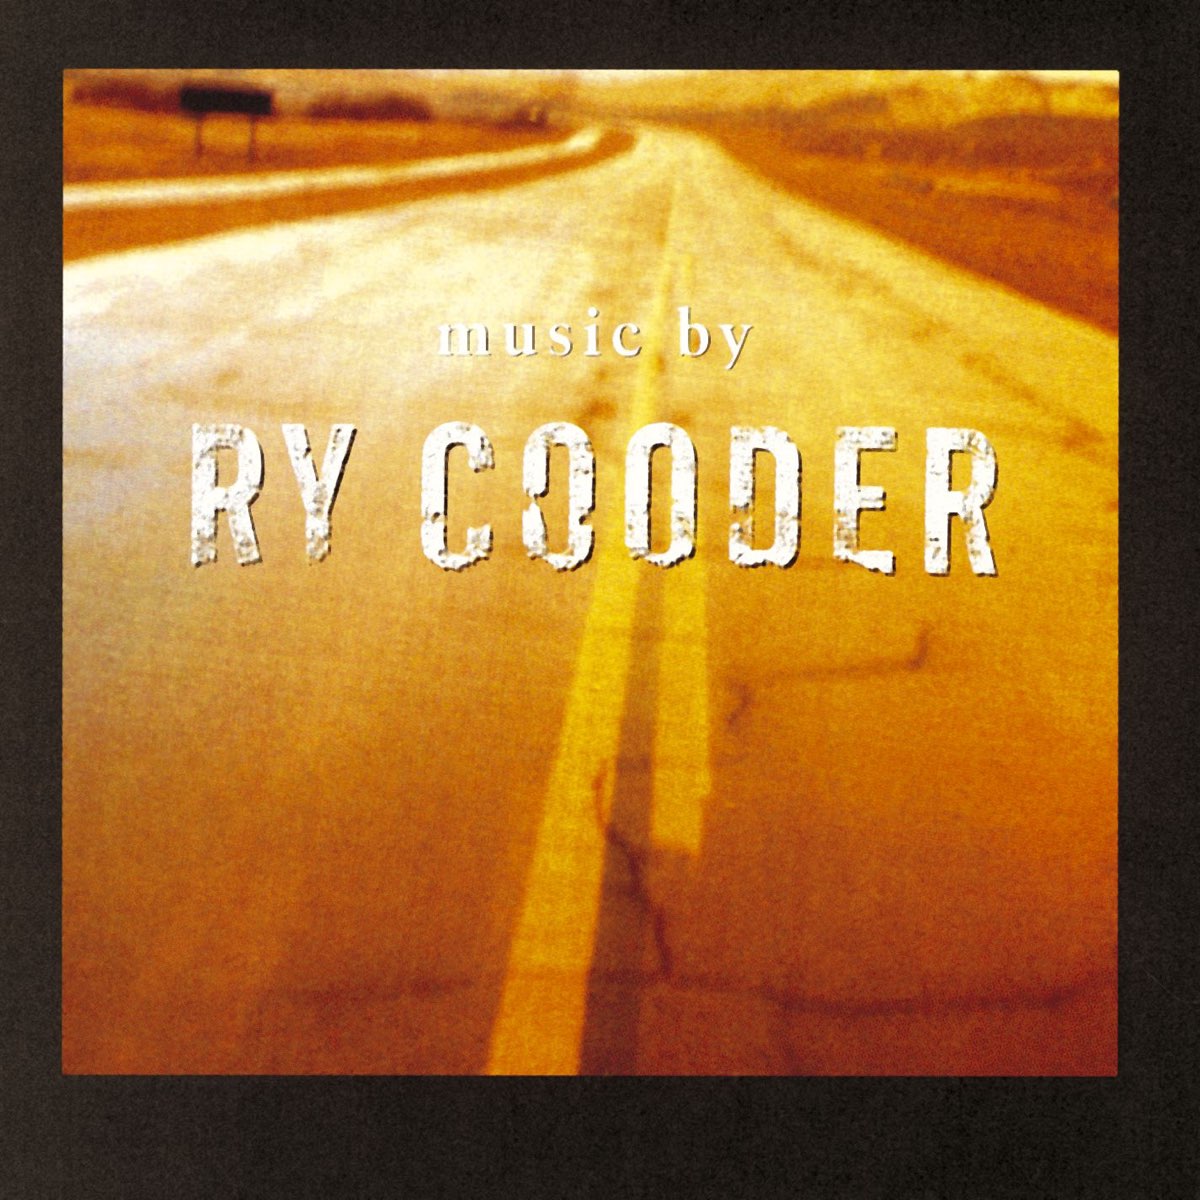 Music by Ry Cooder》- Ry Cooder的专辑 - Apple Music